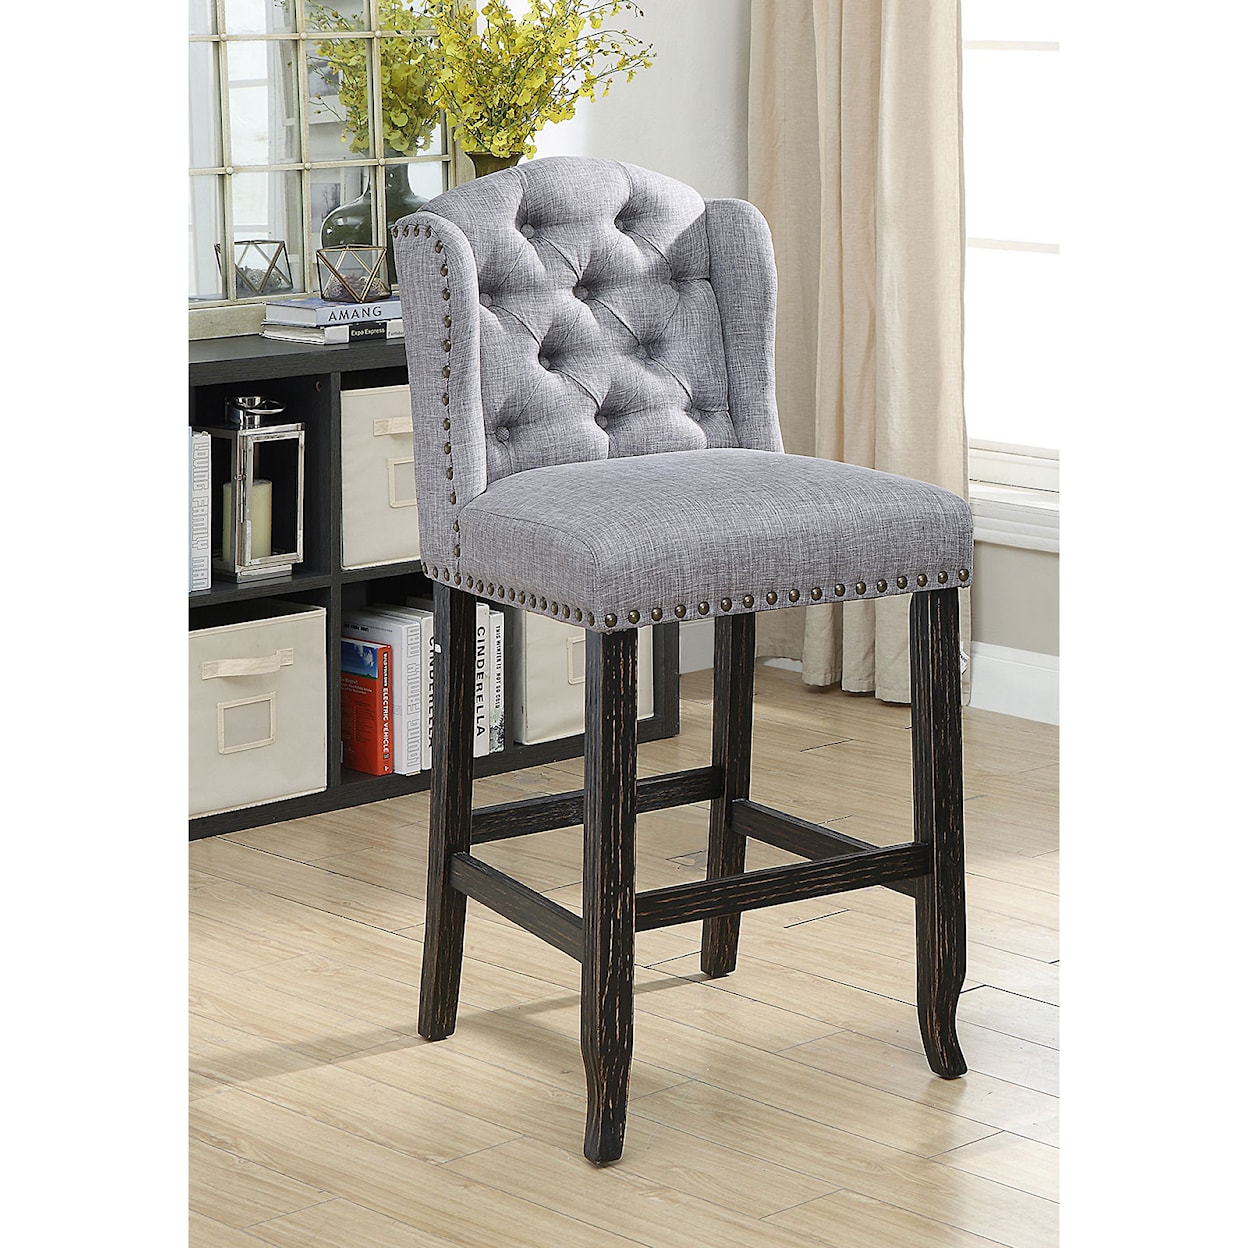 Furniture of America Sania Wing Back Bar Height Chair